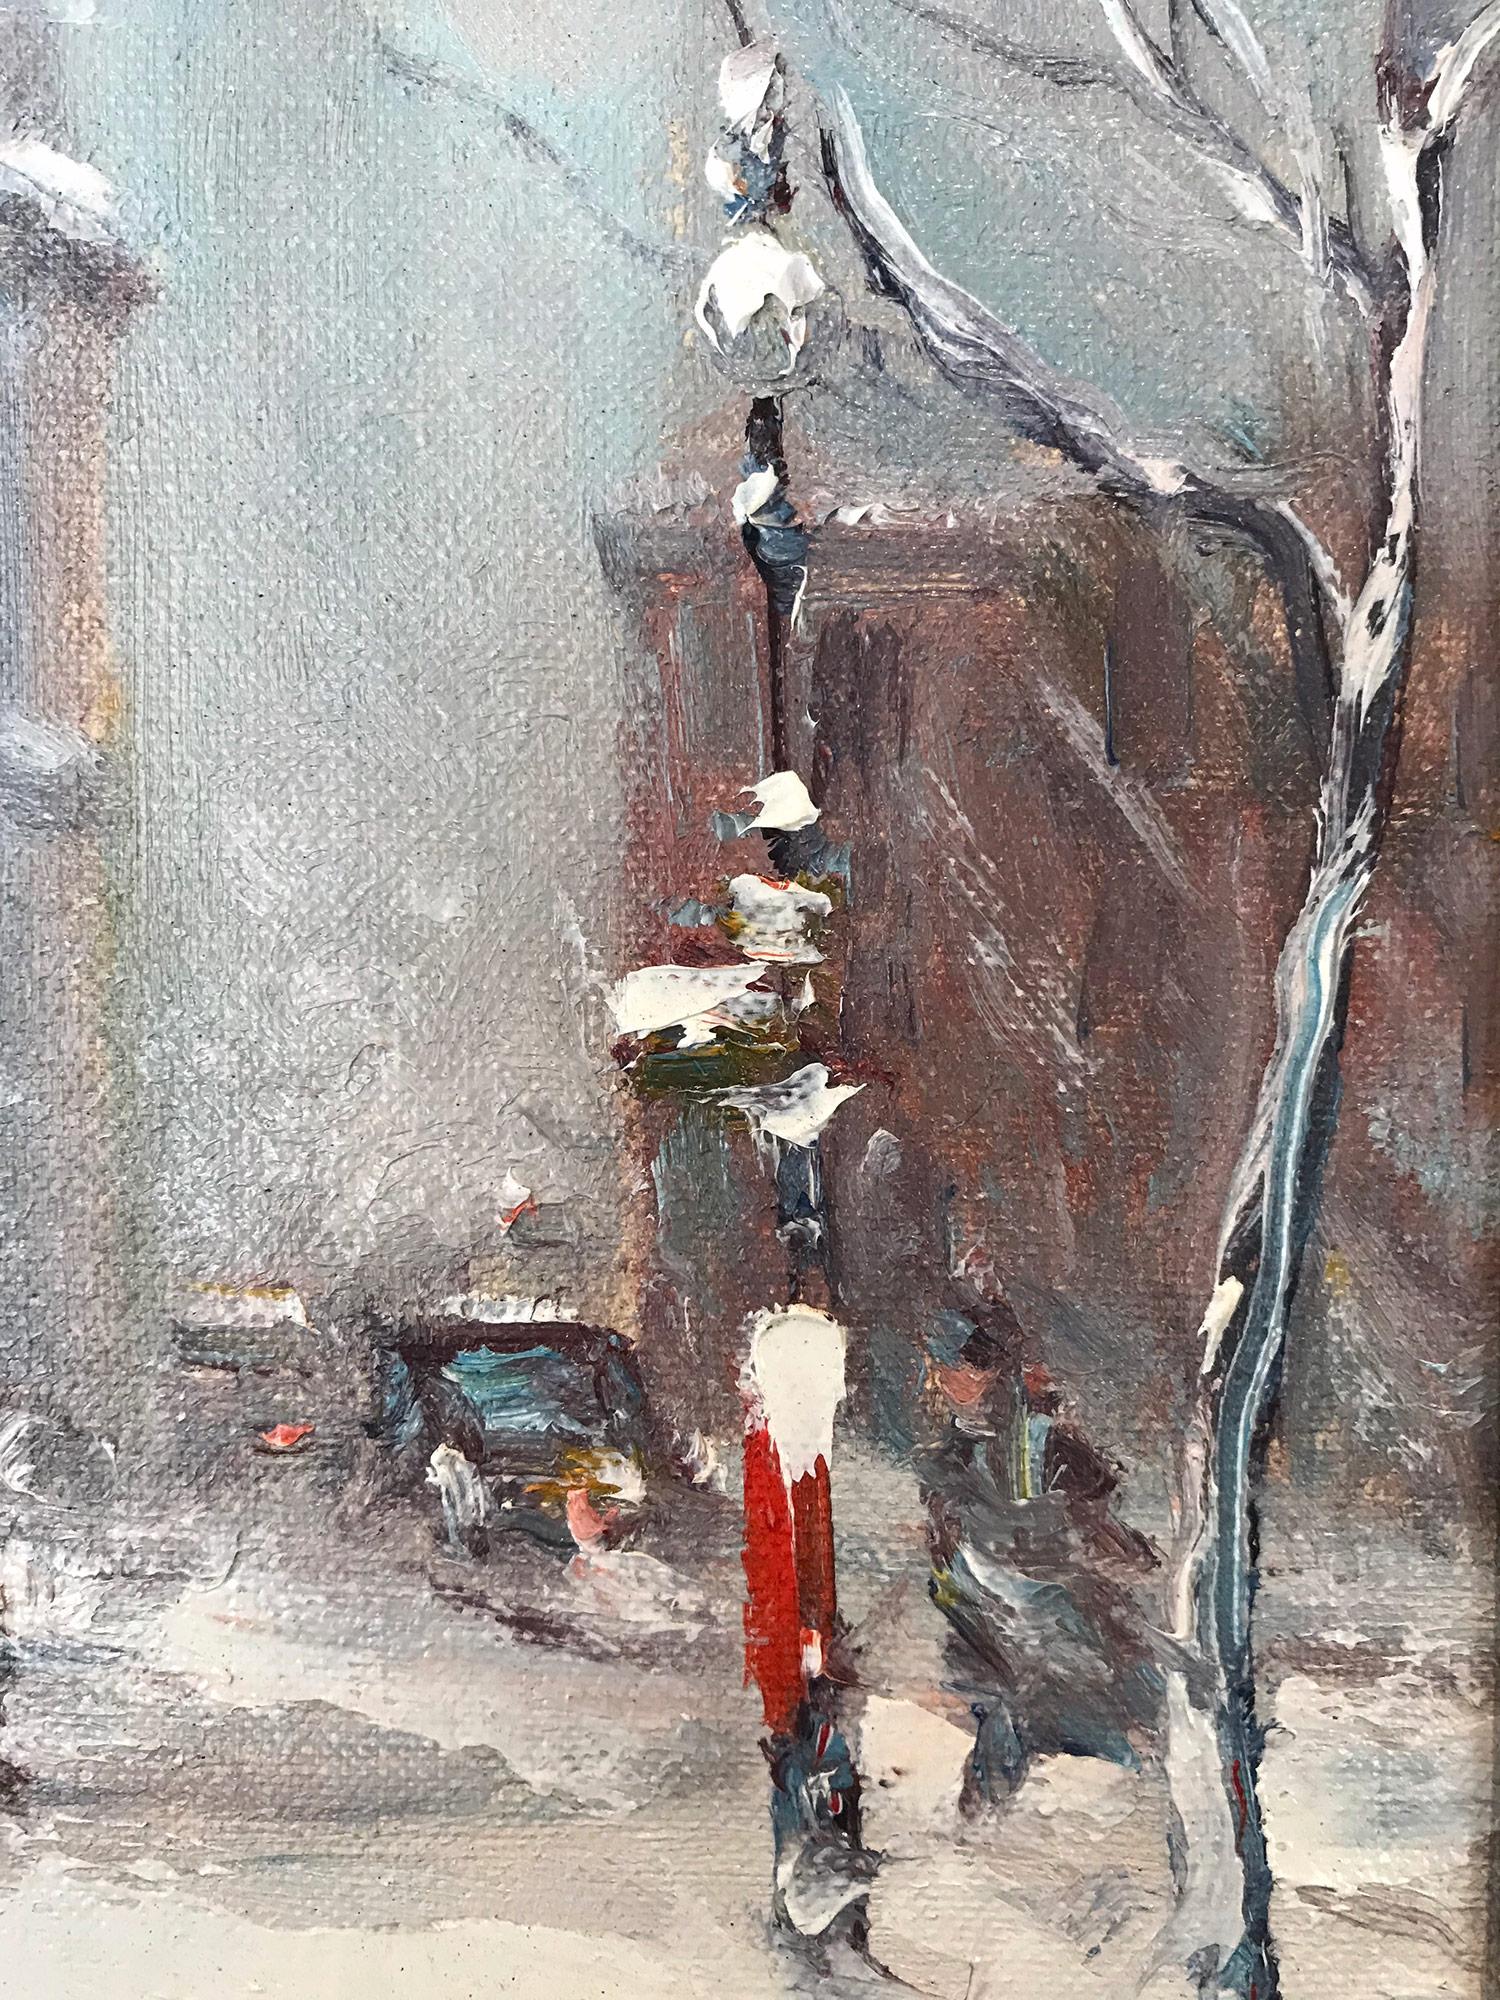 A truly stunning jewel and pertinent example of Berthelsen's charming New York City winter scenes depicting Washington Square Park in the snow. An iconic scene that so many have come to love and cherish. The artist was truly a master at capturing